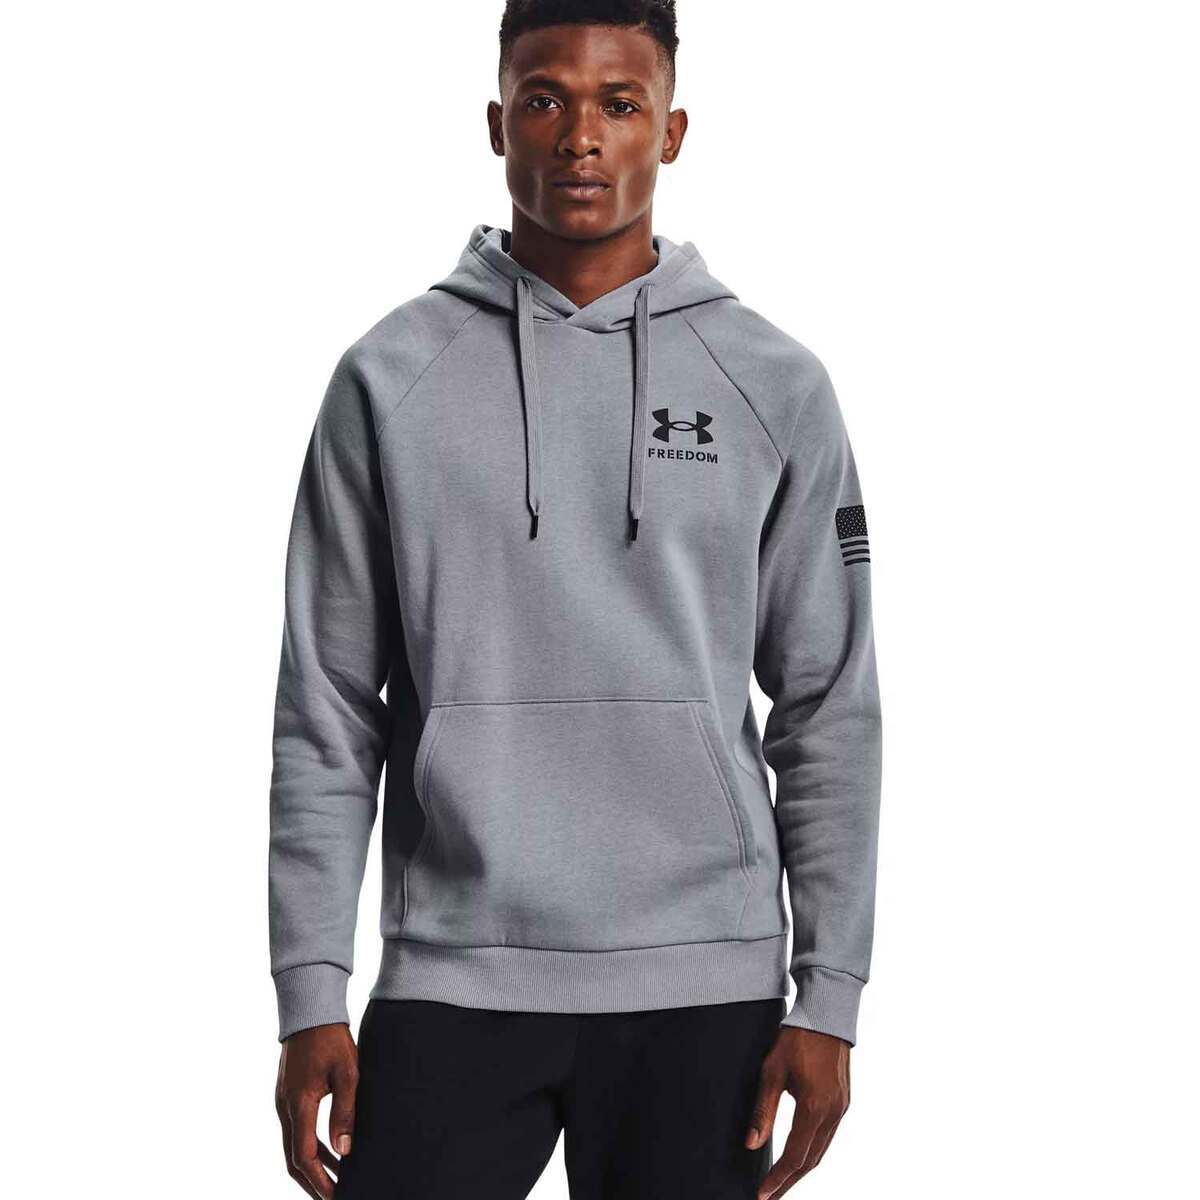 Under Armour Men's Freedom Flag Casual Hoodie | Sportsman's Warehouse